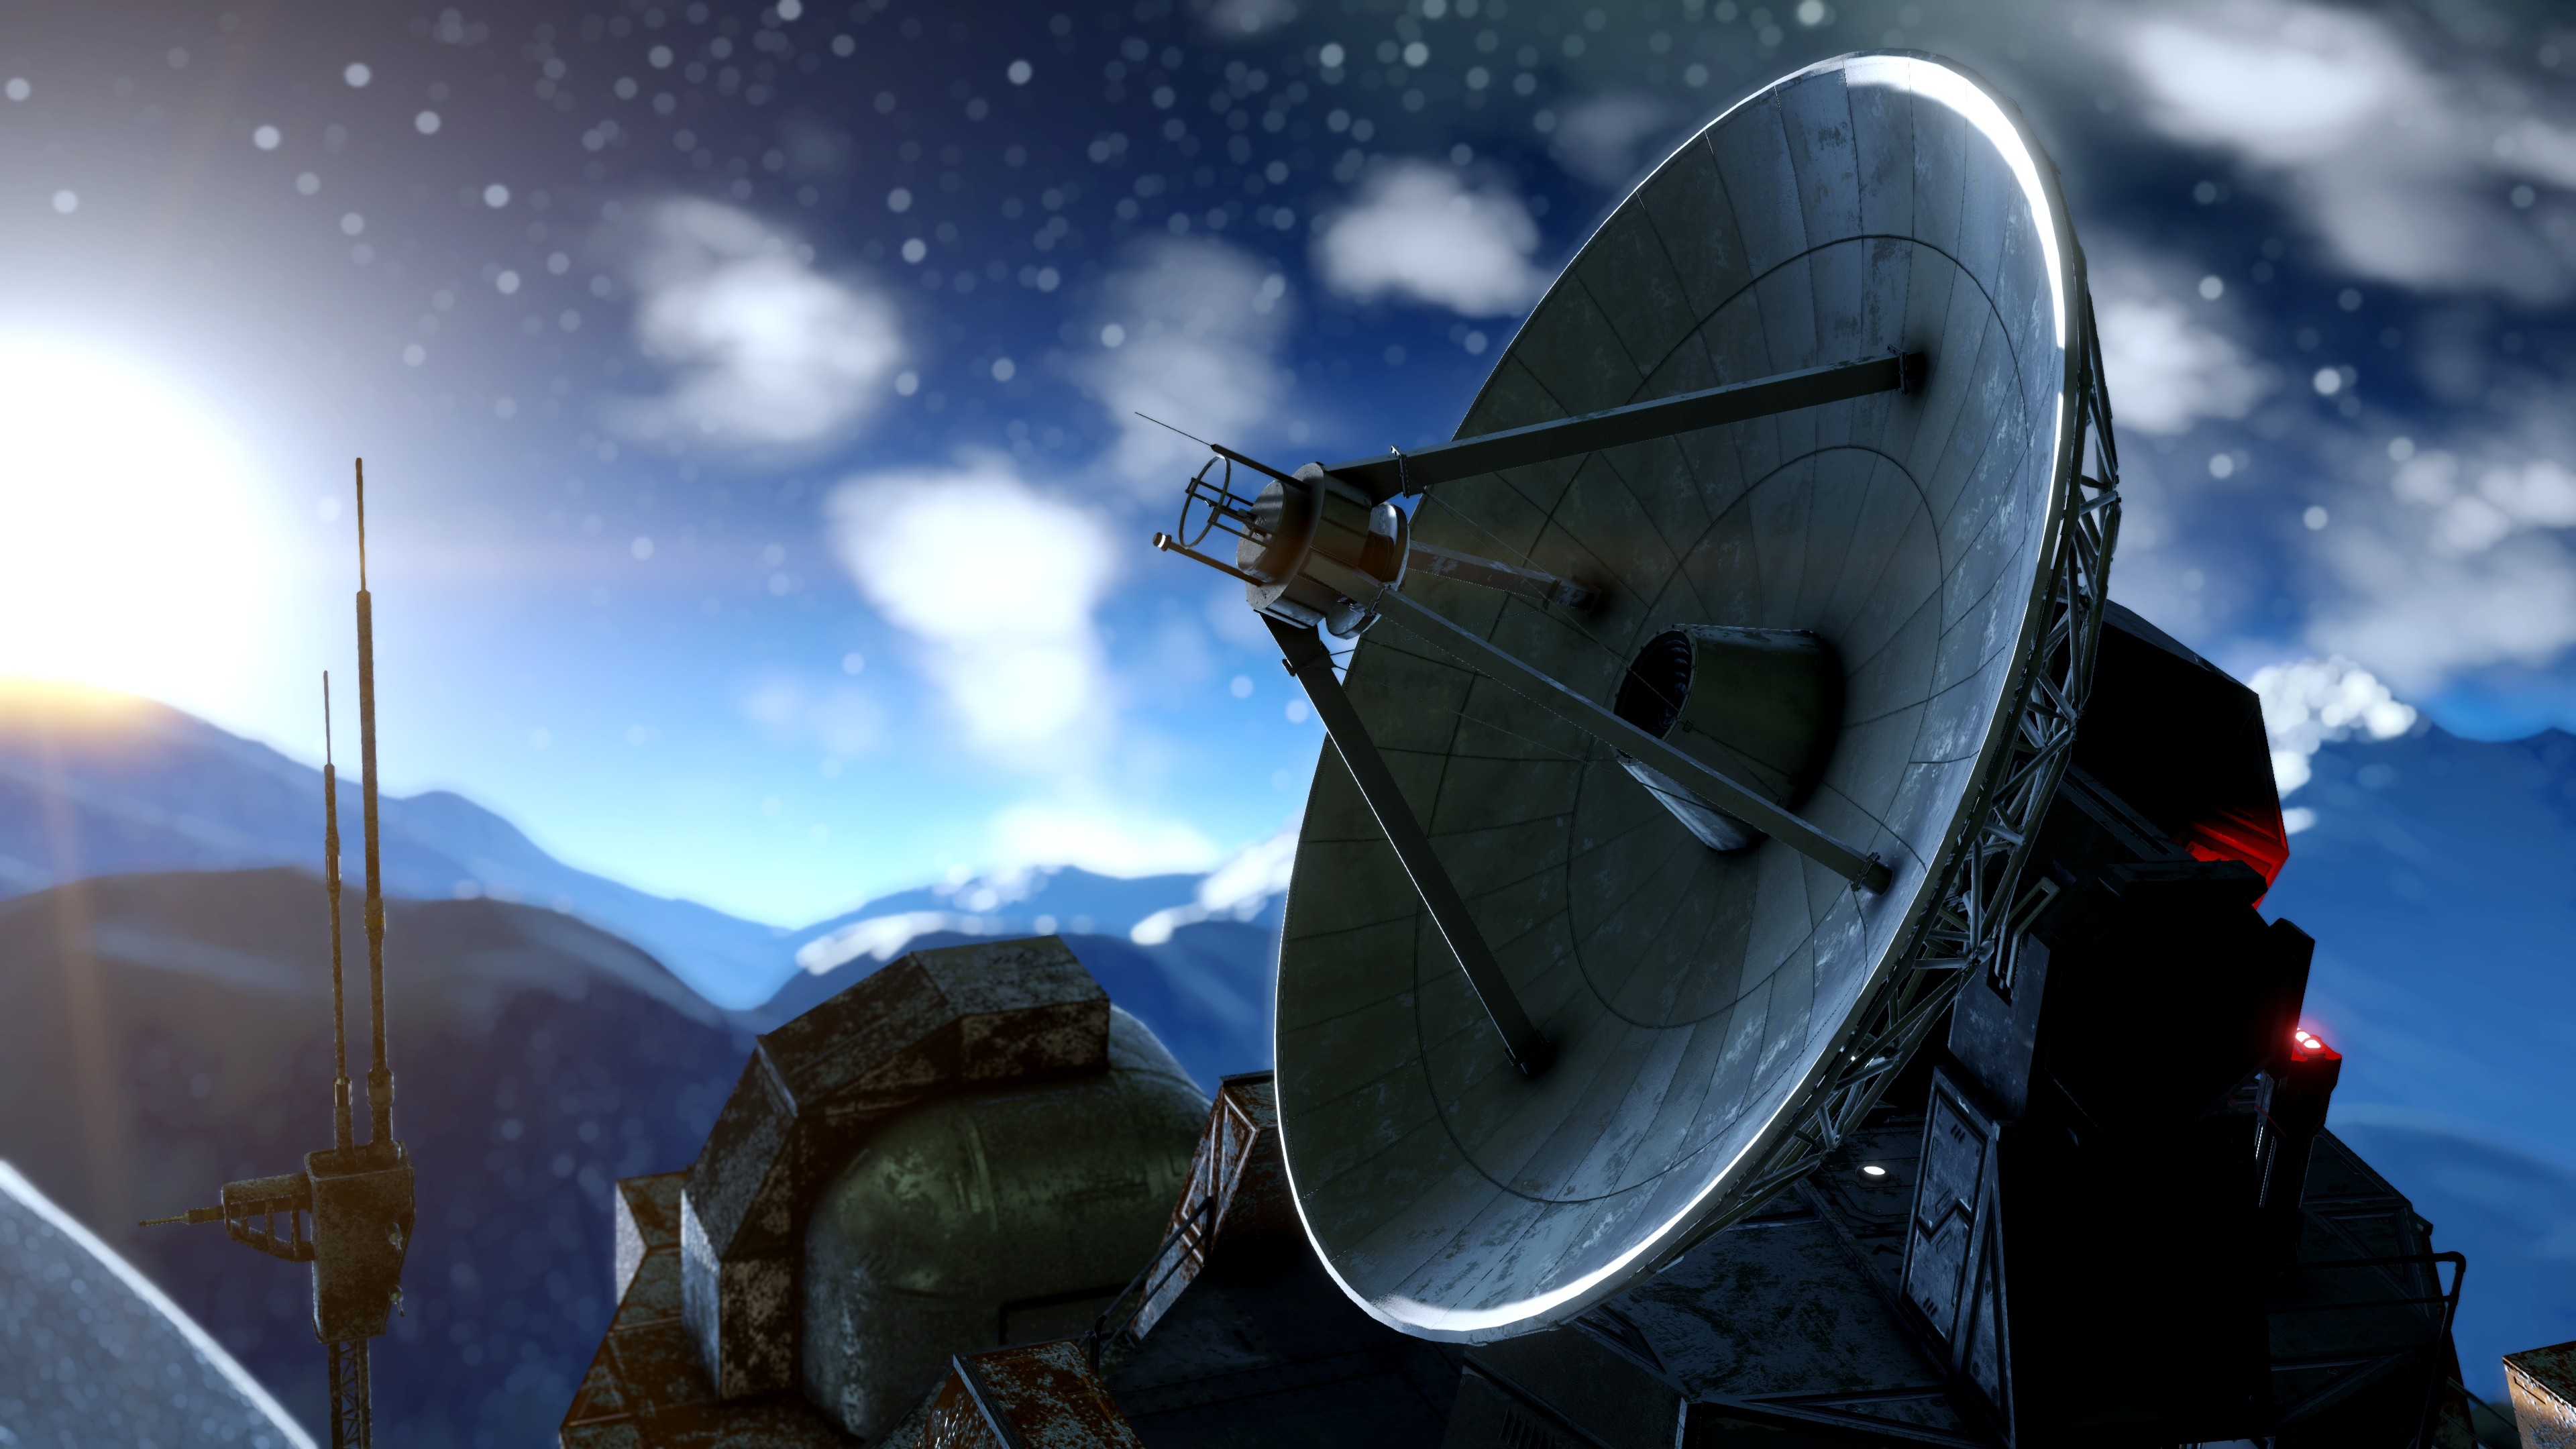 HD wallpaper featuring a detailed satellite dish from the game Space Engineers set against a snowy mountain landscape and starry sky.